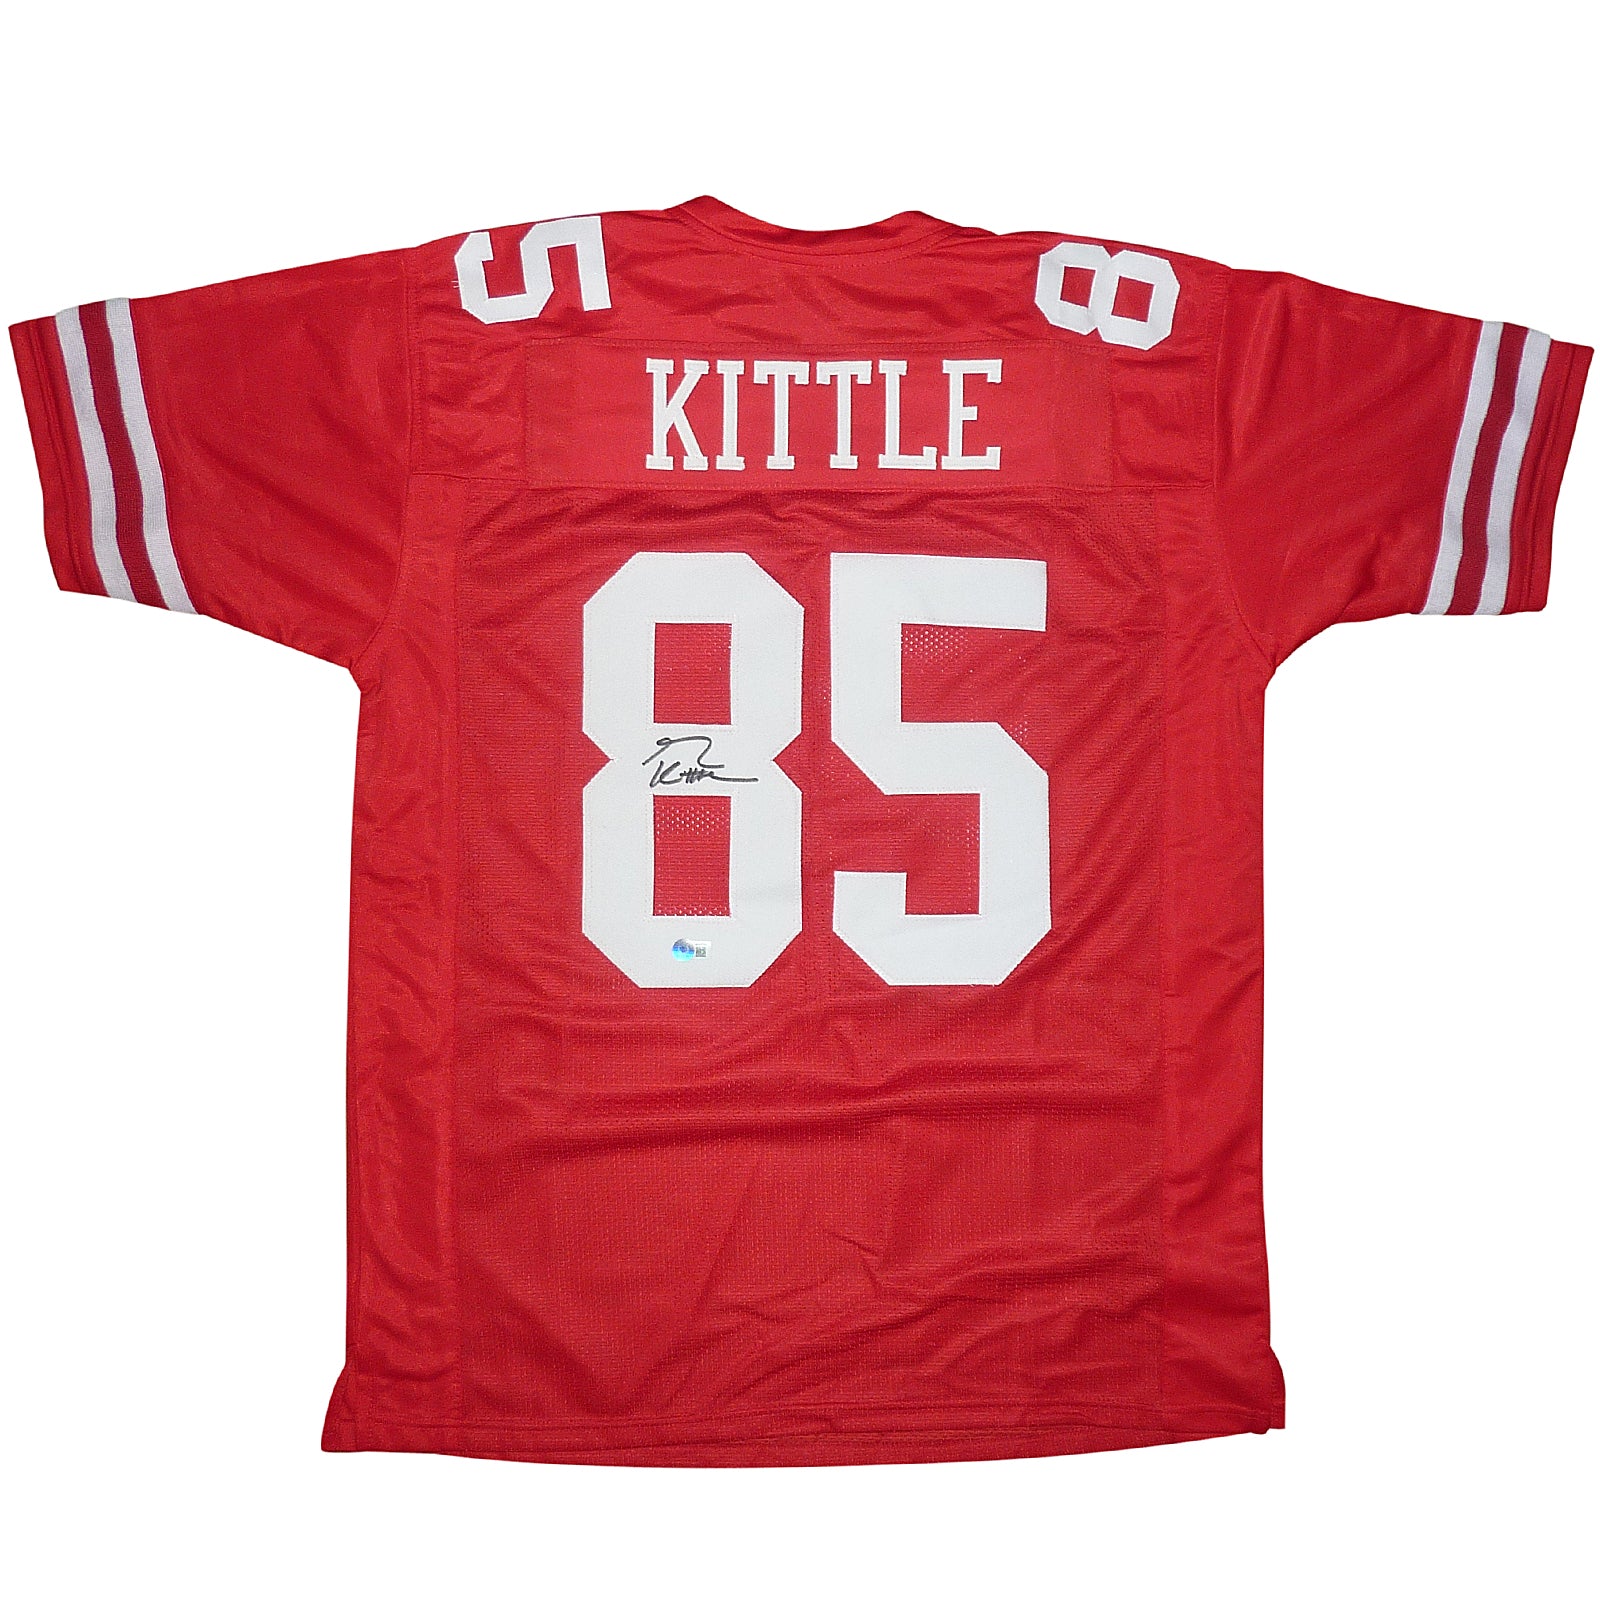 George Kittle Autographed Jersey - Beckett Authentic - Red